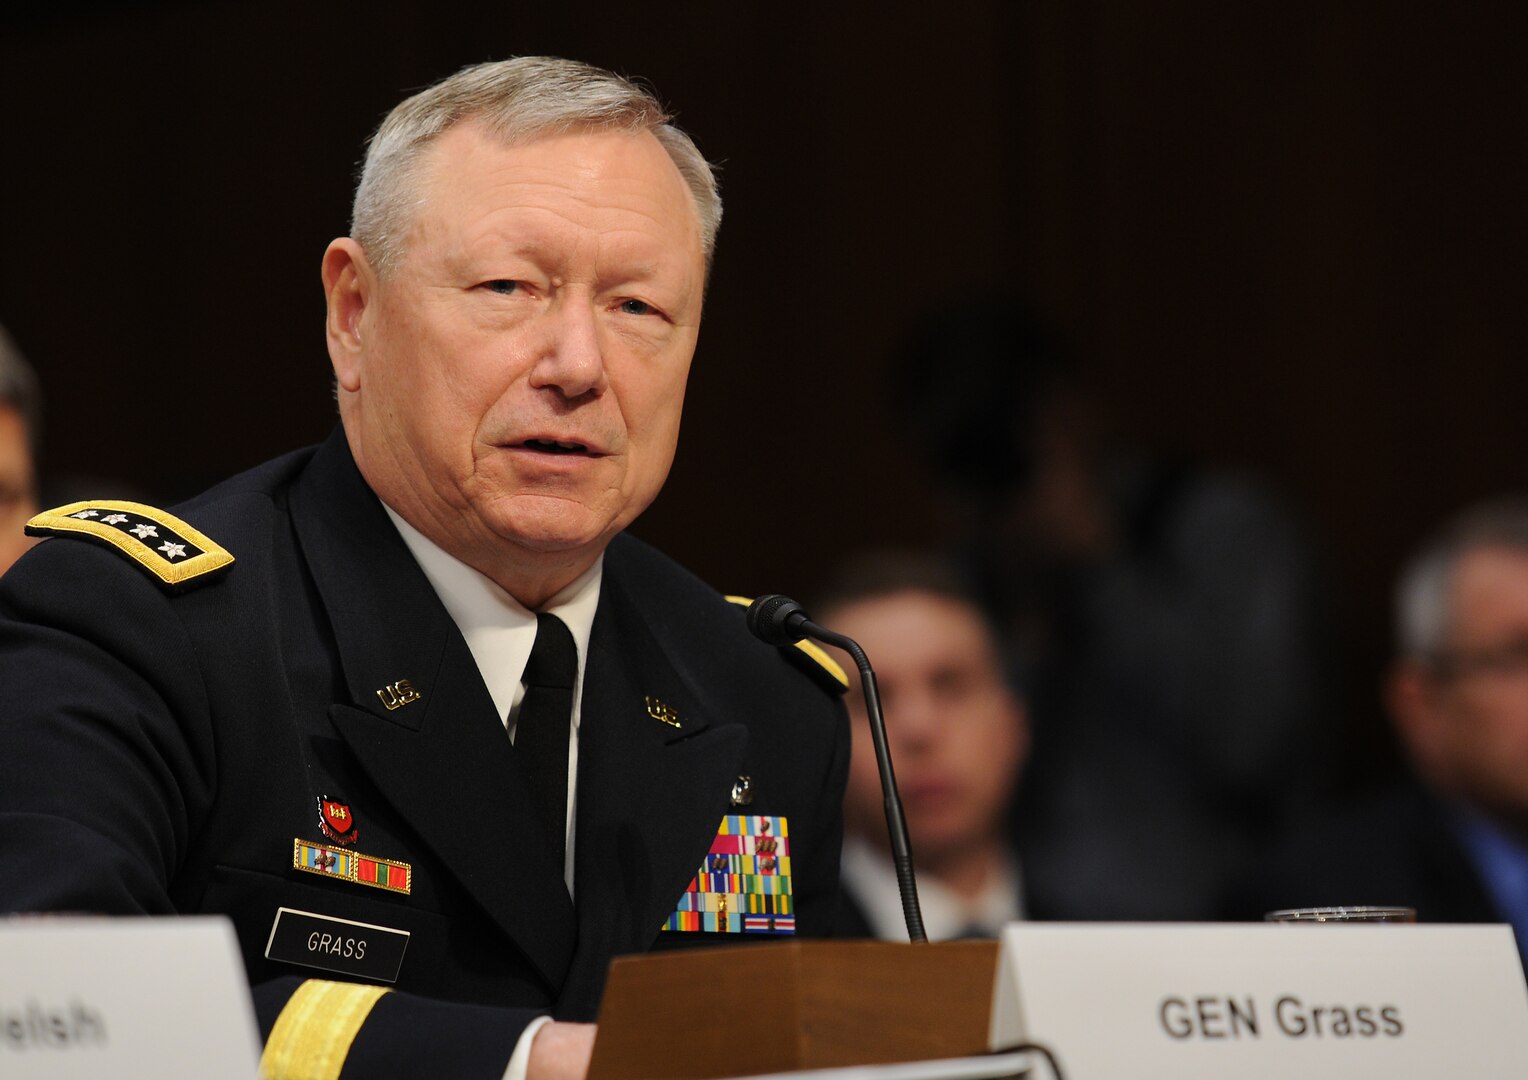 Army Gen. Frank Grass, the chief of the National Guard Bureau, testifies at a Senate Armed Services Committee on the Department of Defense military compensation proposals, May 6, 2014.